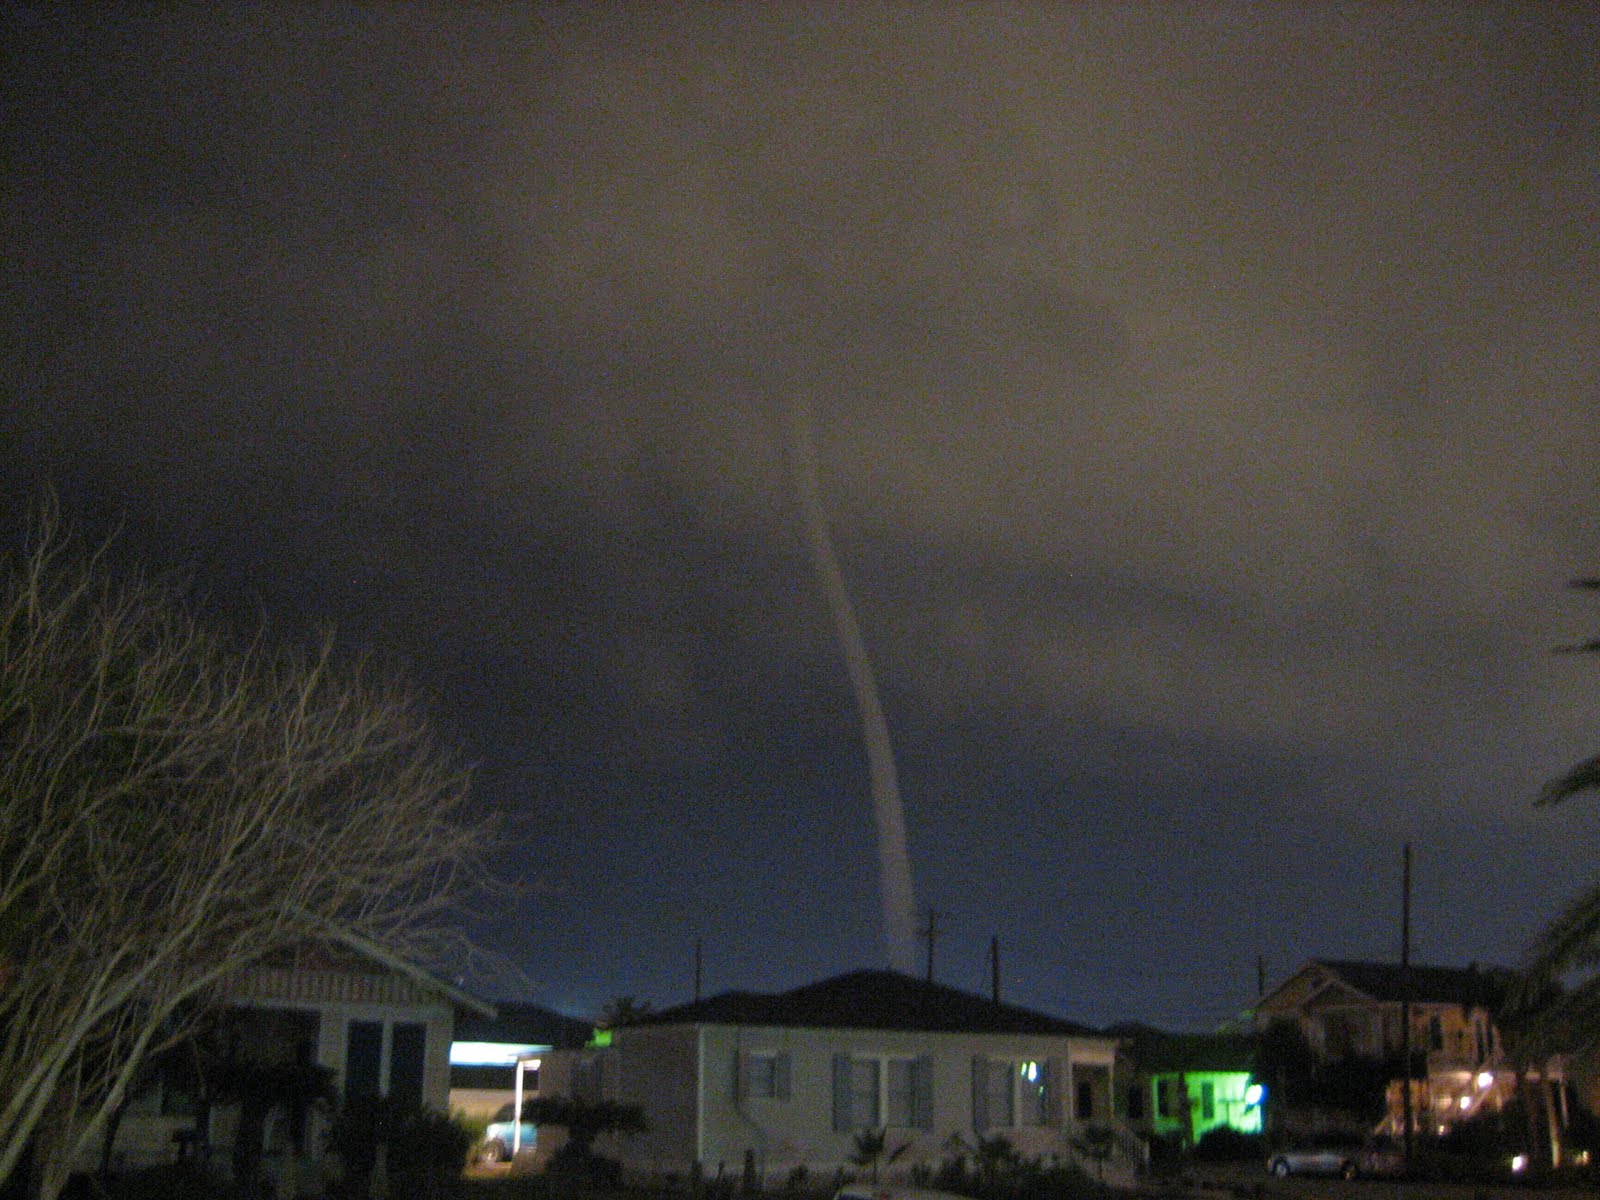 August 30, 2009 Waterspout photo (courtesy of Daniel Pruessner) taken on Galveston Island around 14th Street about a block from the Seawall and looking to the southwest